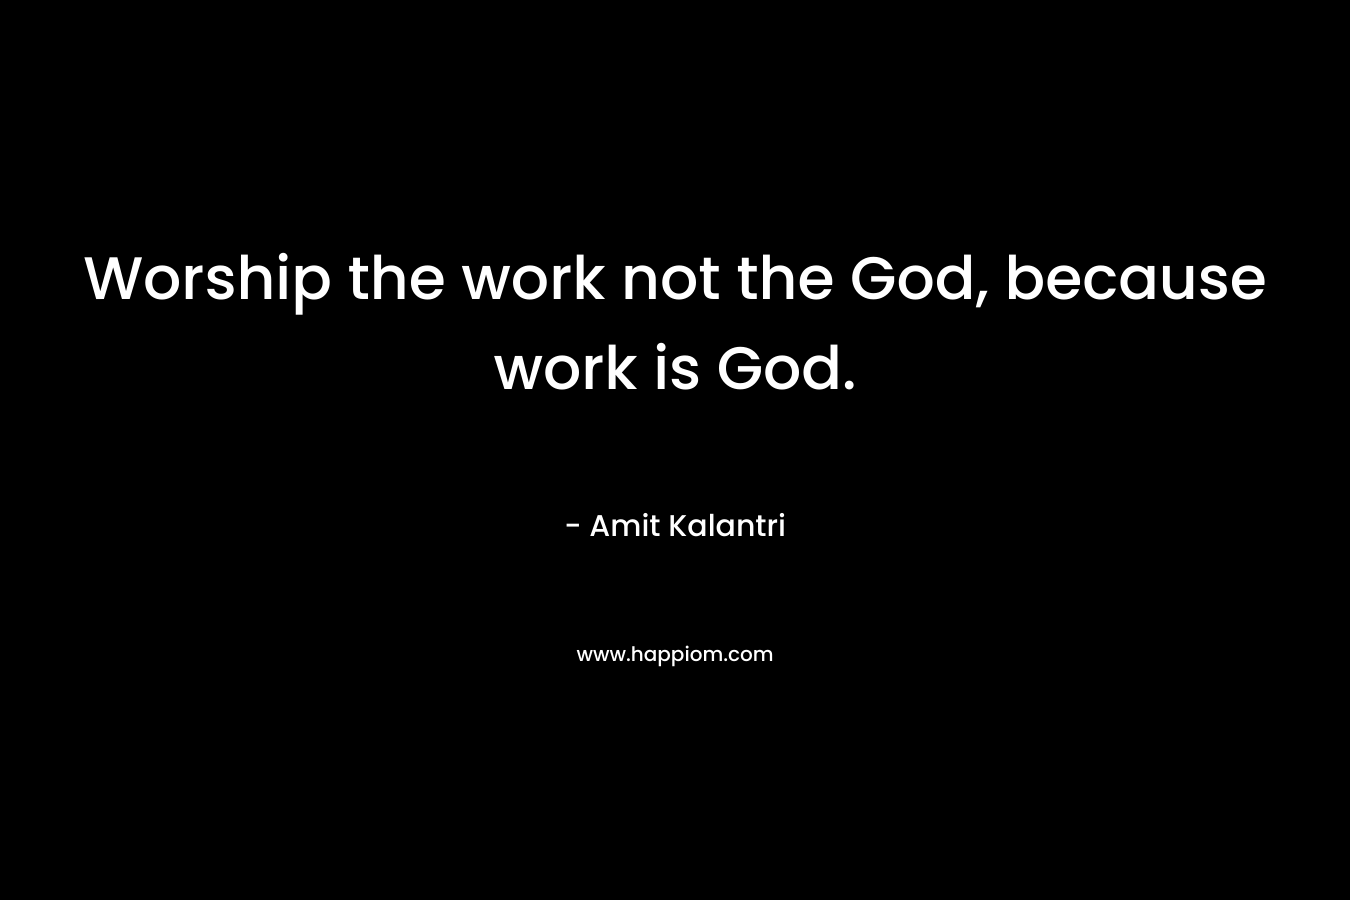 Worship the work not the God, because work is God.